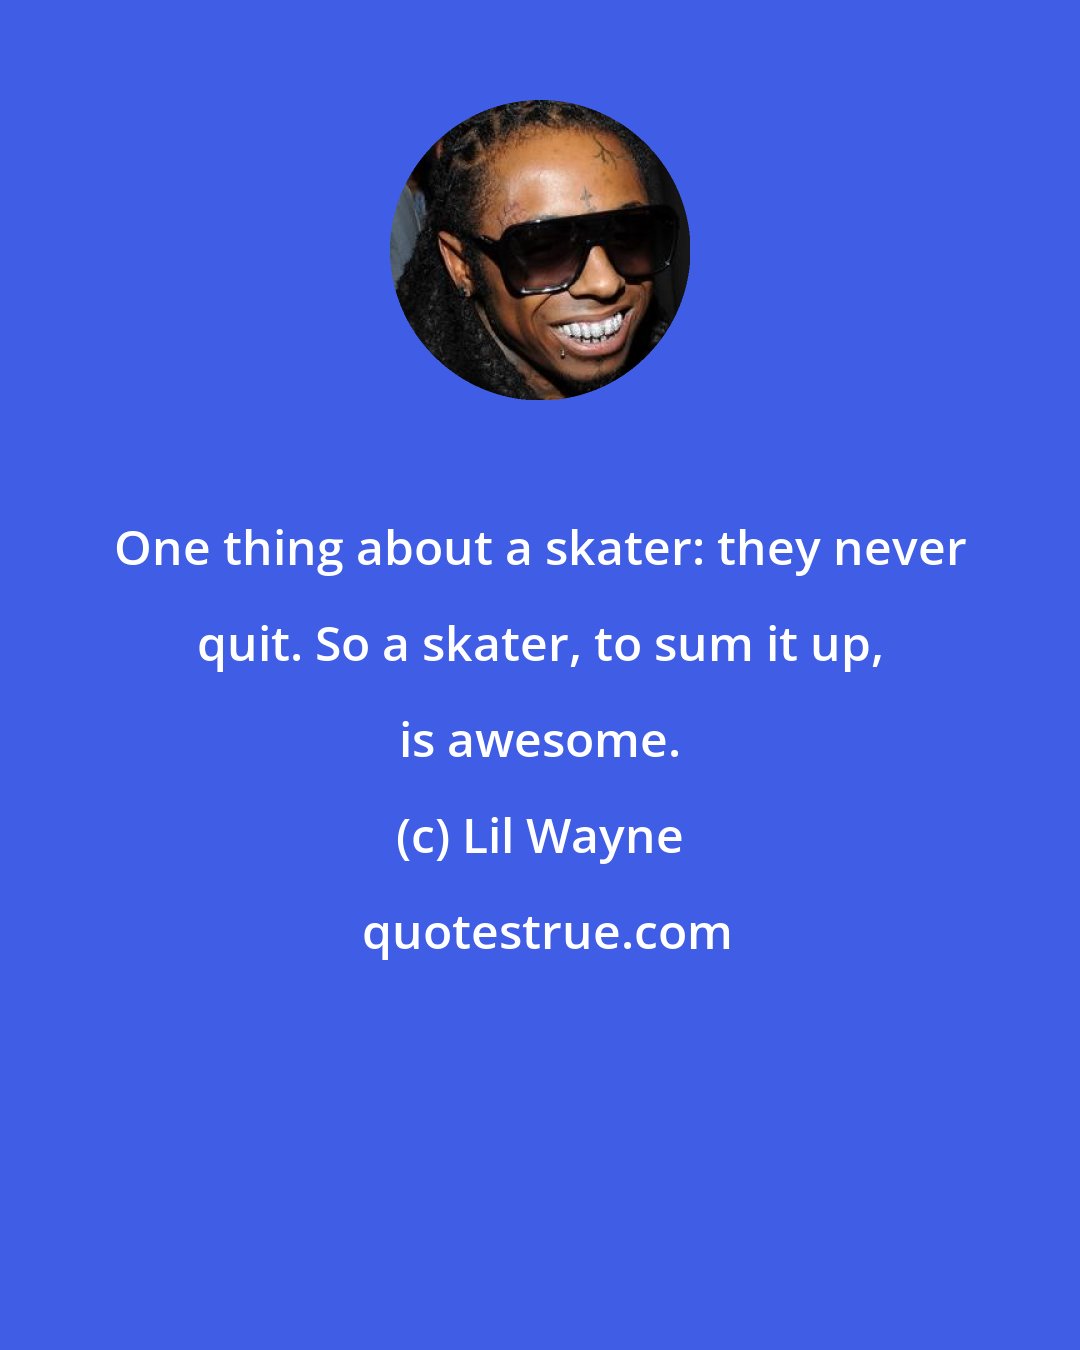 Lil Wayne: One thing about a skater: they never quit. So a skater, to sum it up, is awesome.